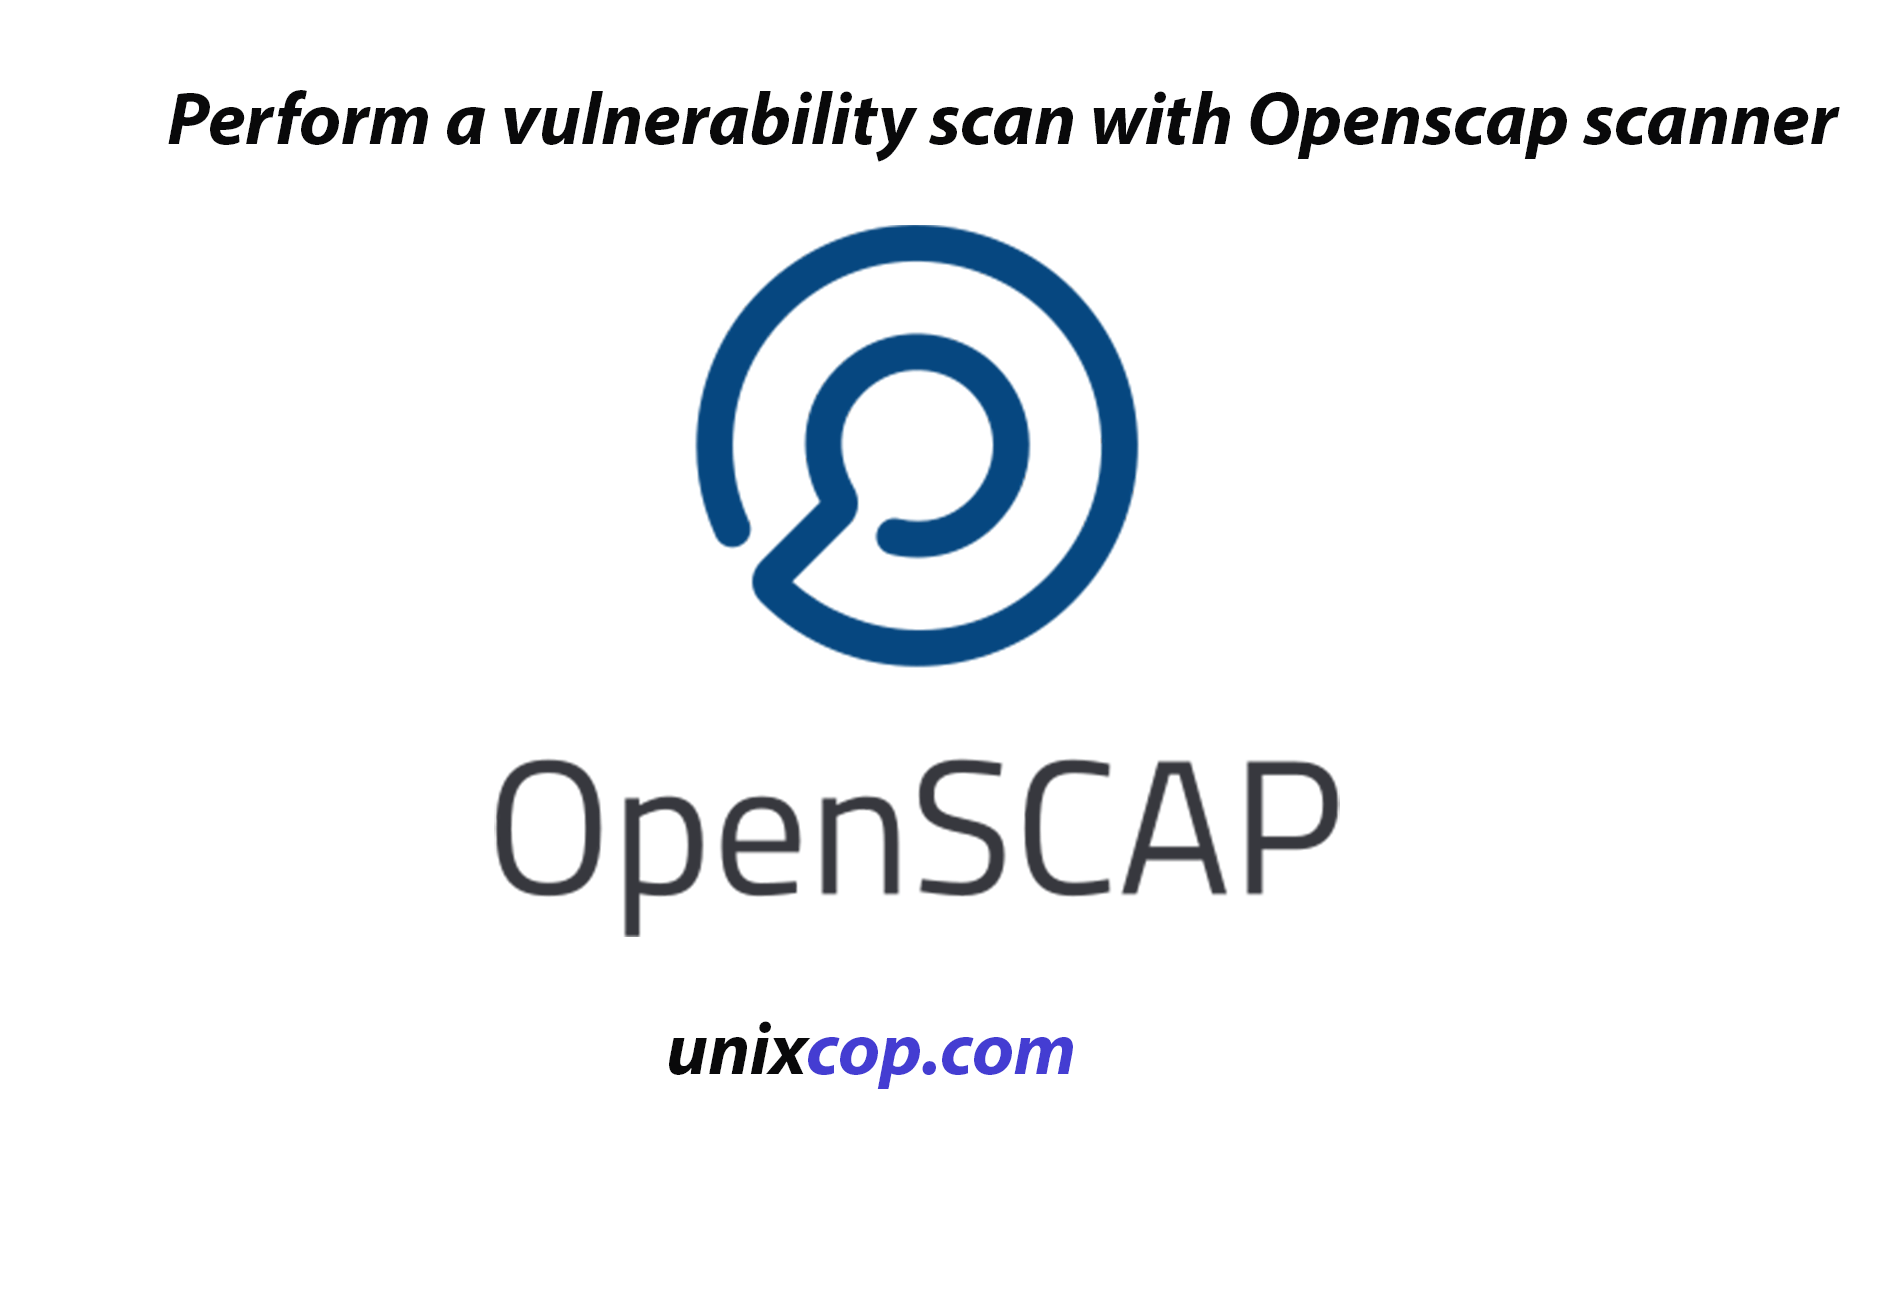 Perform a vulnerability scan with Openscap scanner